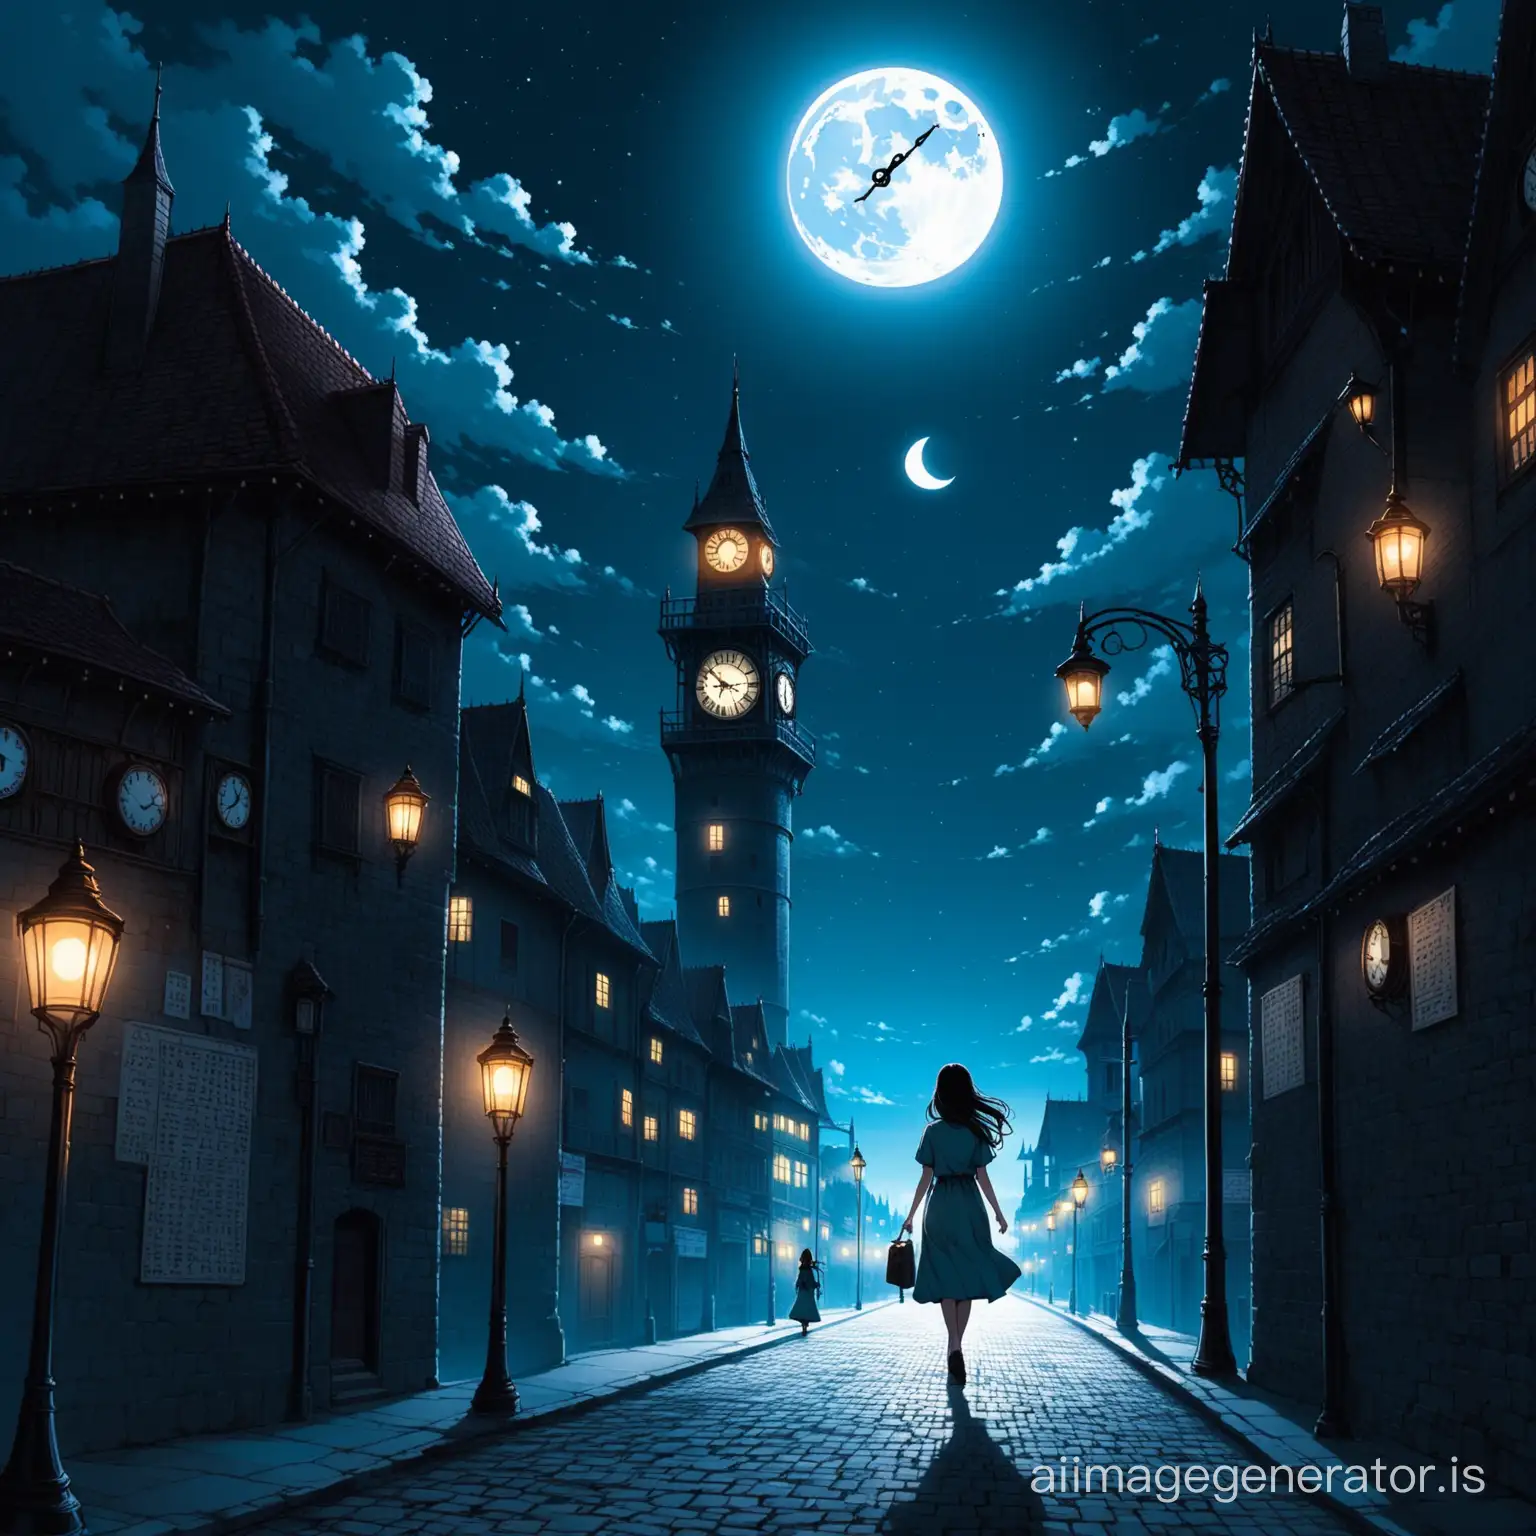 Woman-Walking-under-Full-Moon-with-Street-Lamp-and-Clock-Tower-Shadows